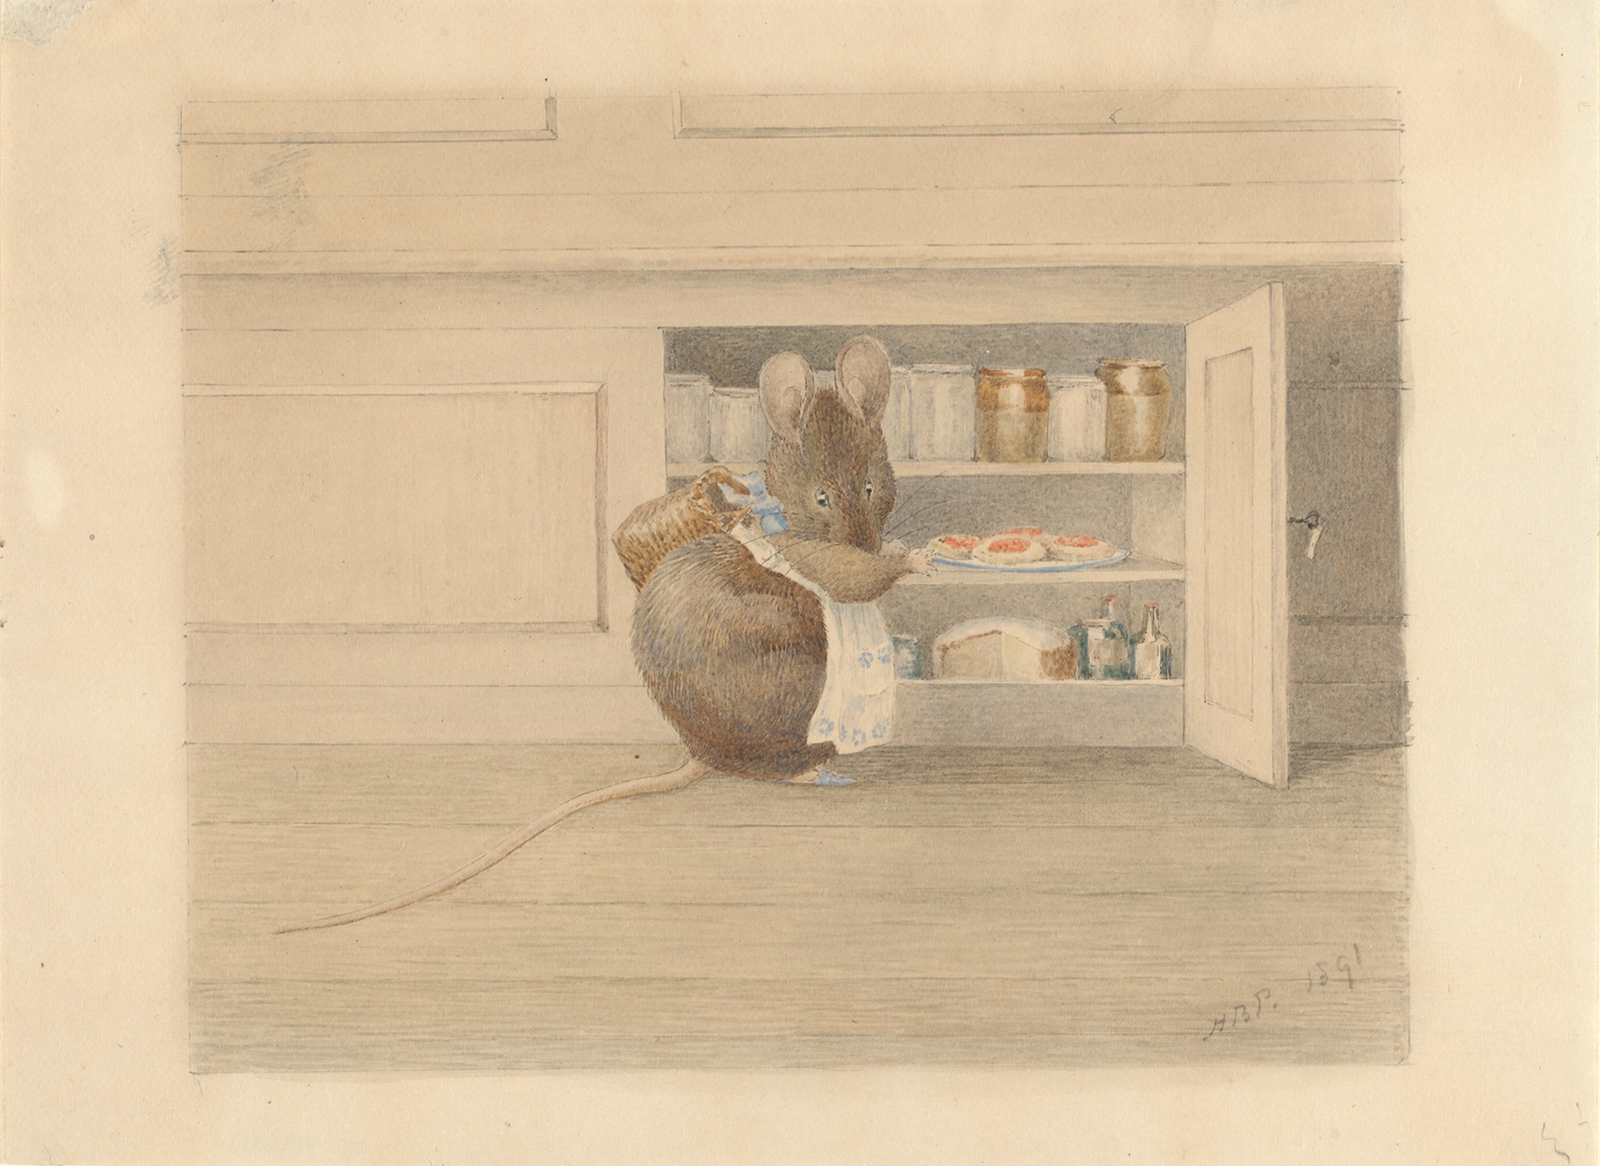 Drawing of a small mouse with an apron on looking holding a plate of pasties in front of a cupboard